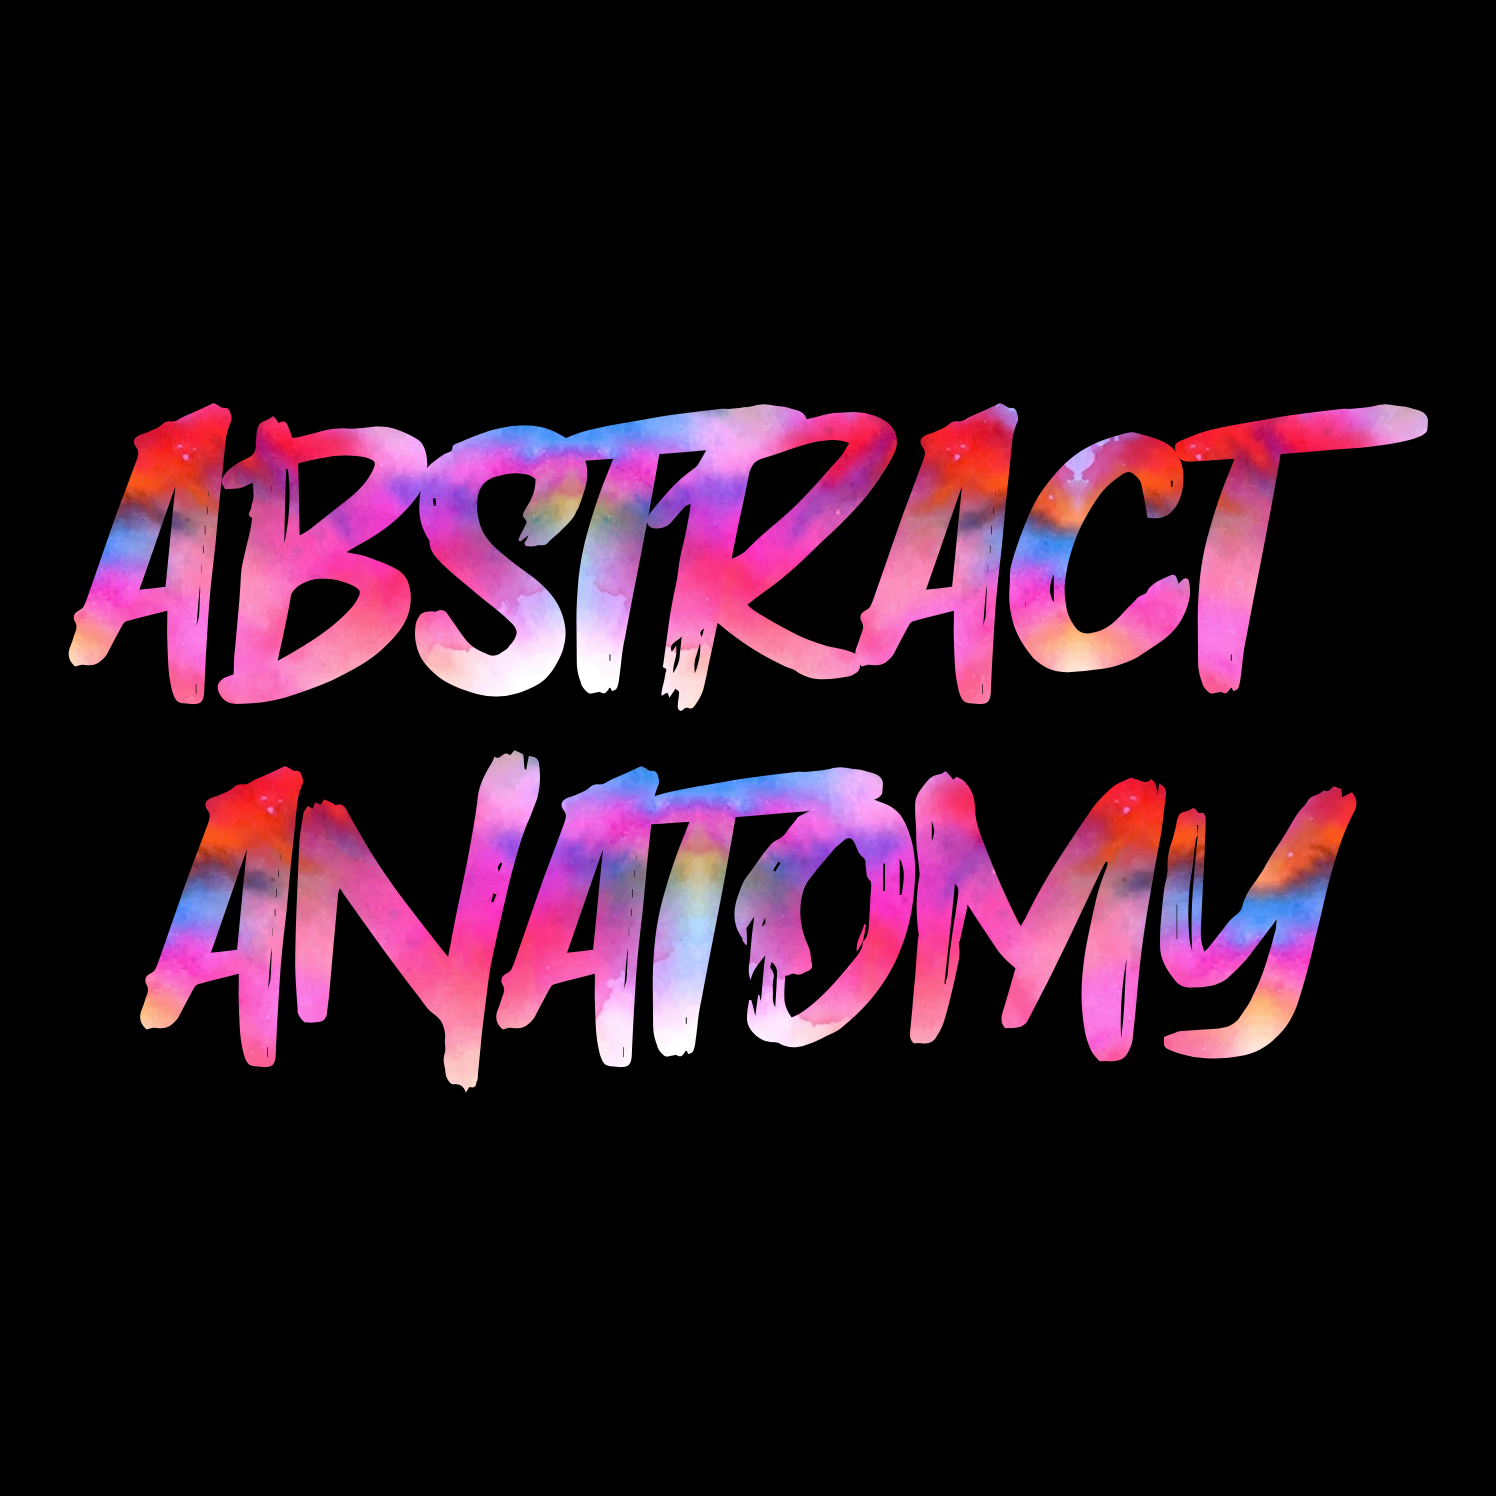 Abstract Anatomy